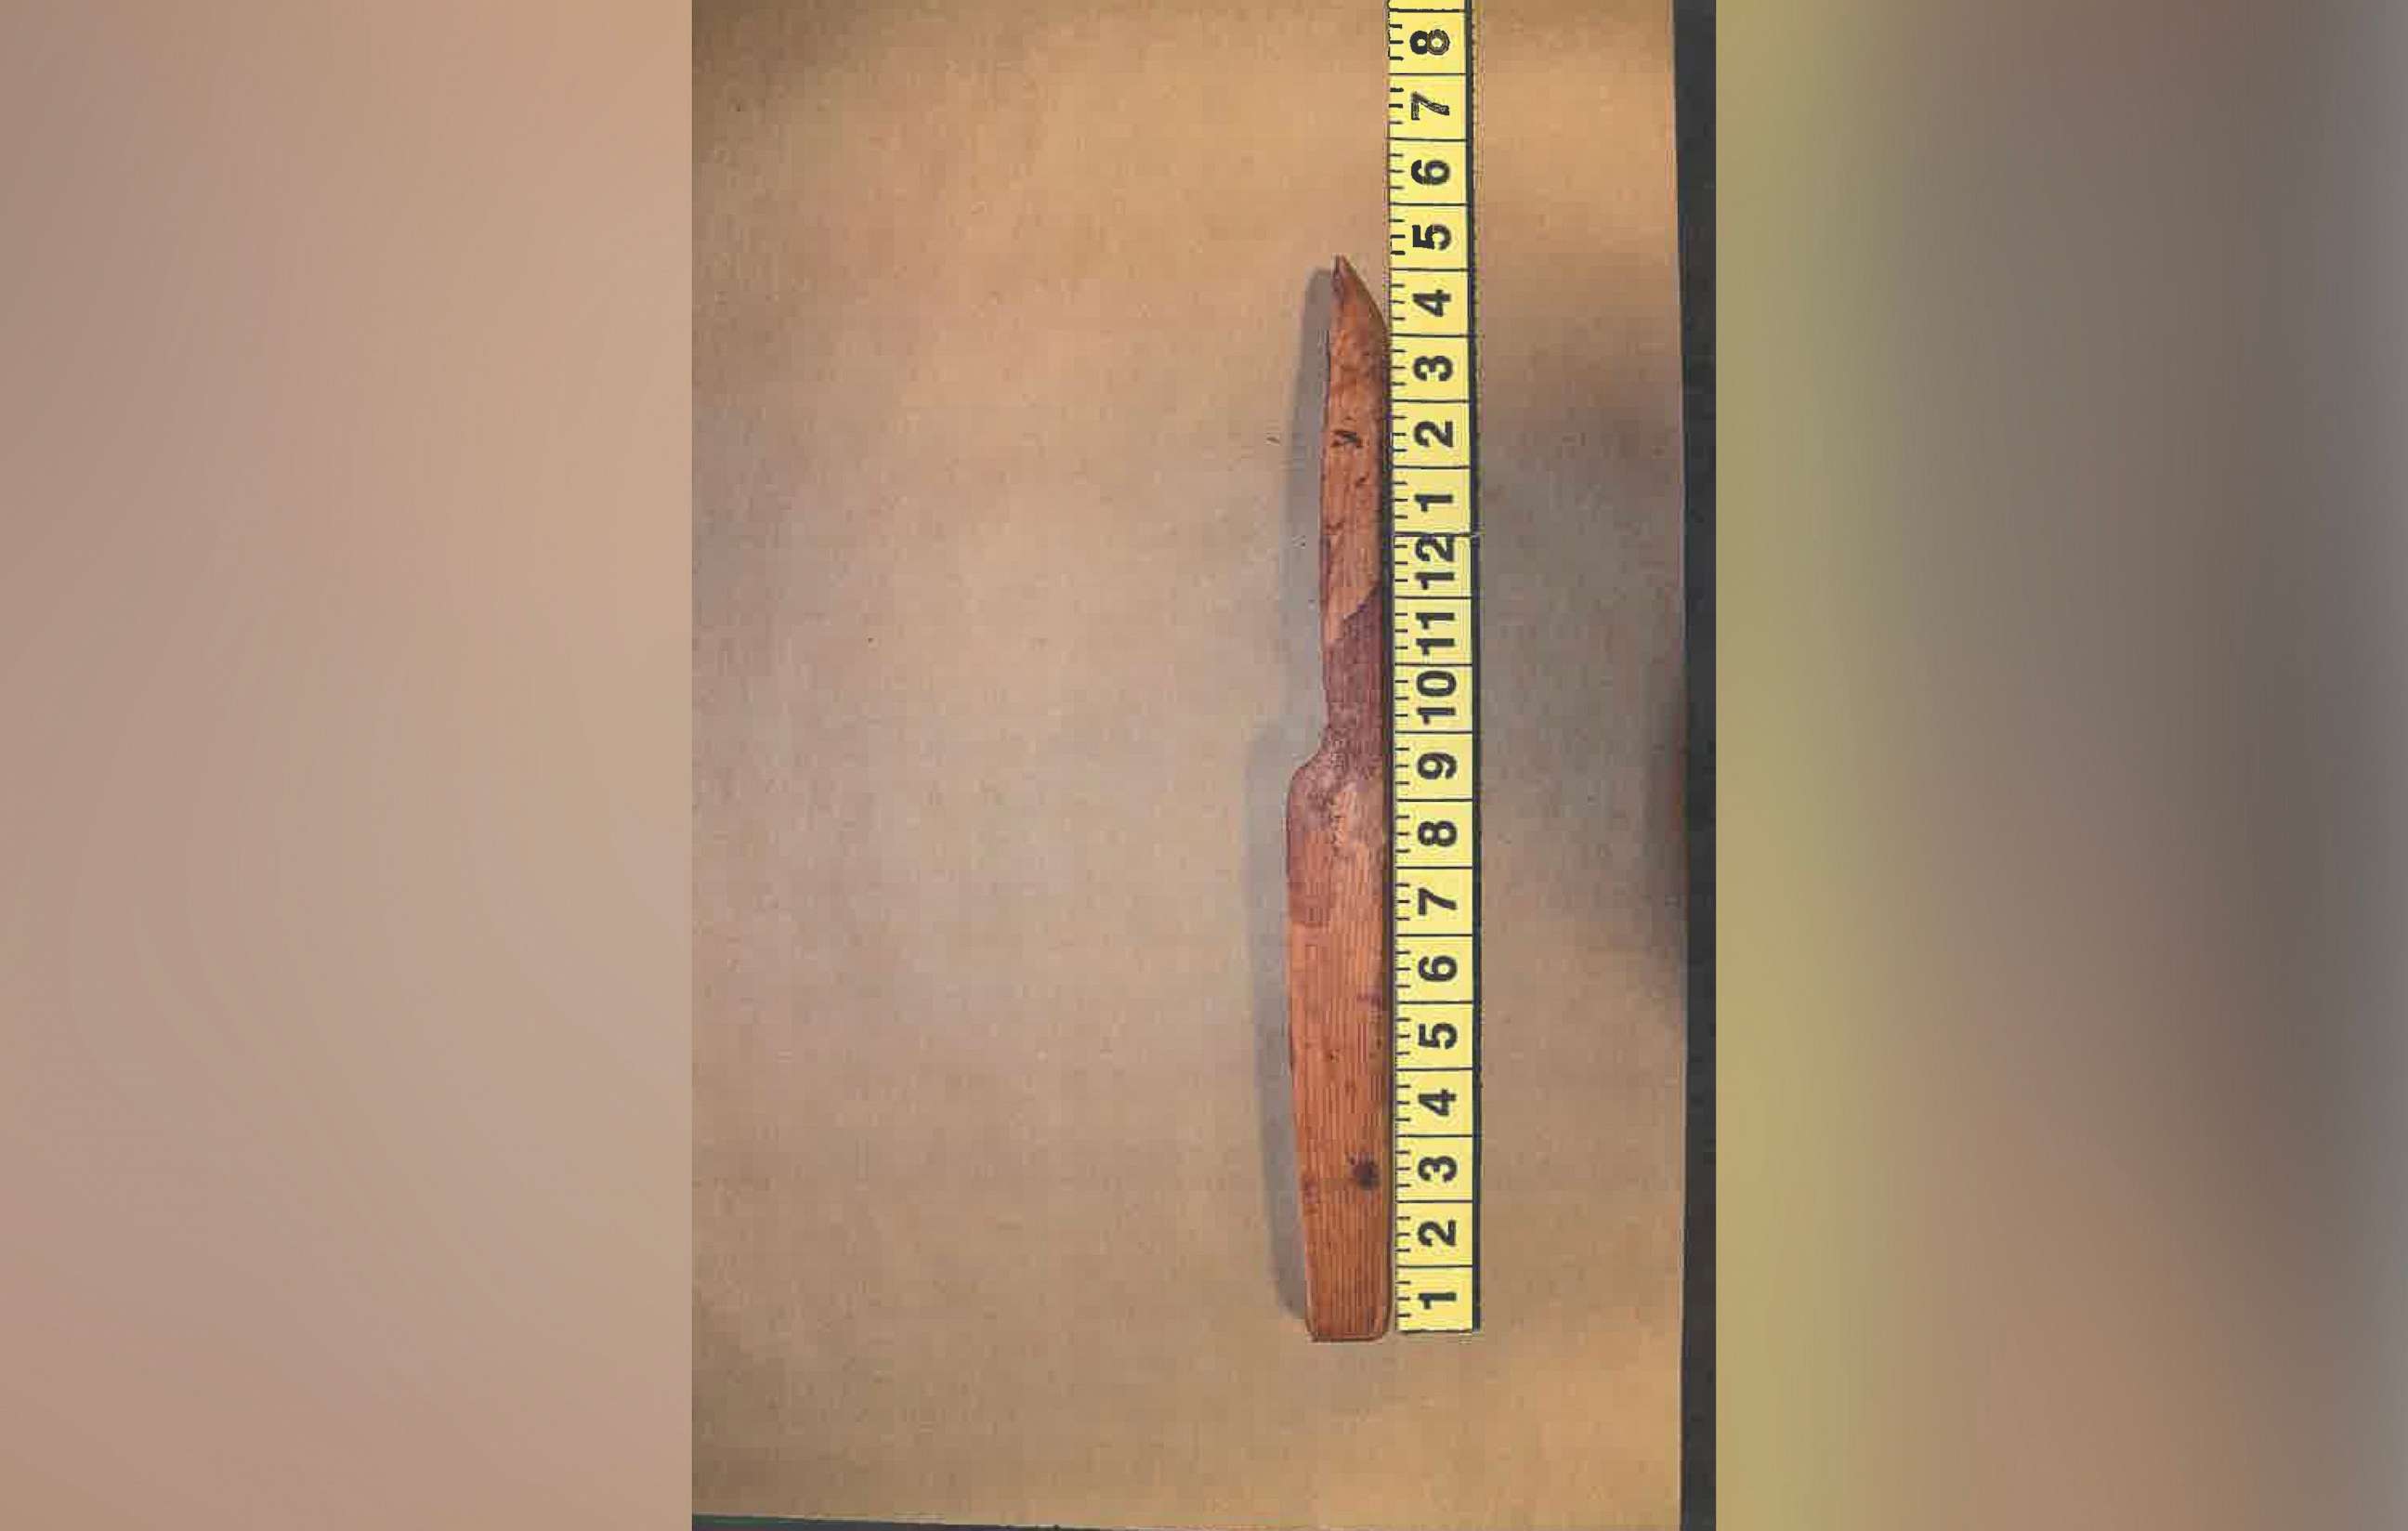 PHOTO: A police evidence photos shows a wooden "stake" that Richland County Sheriff’s Department said a man was wielding when he was shot by deputies.